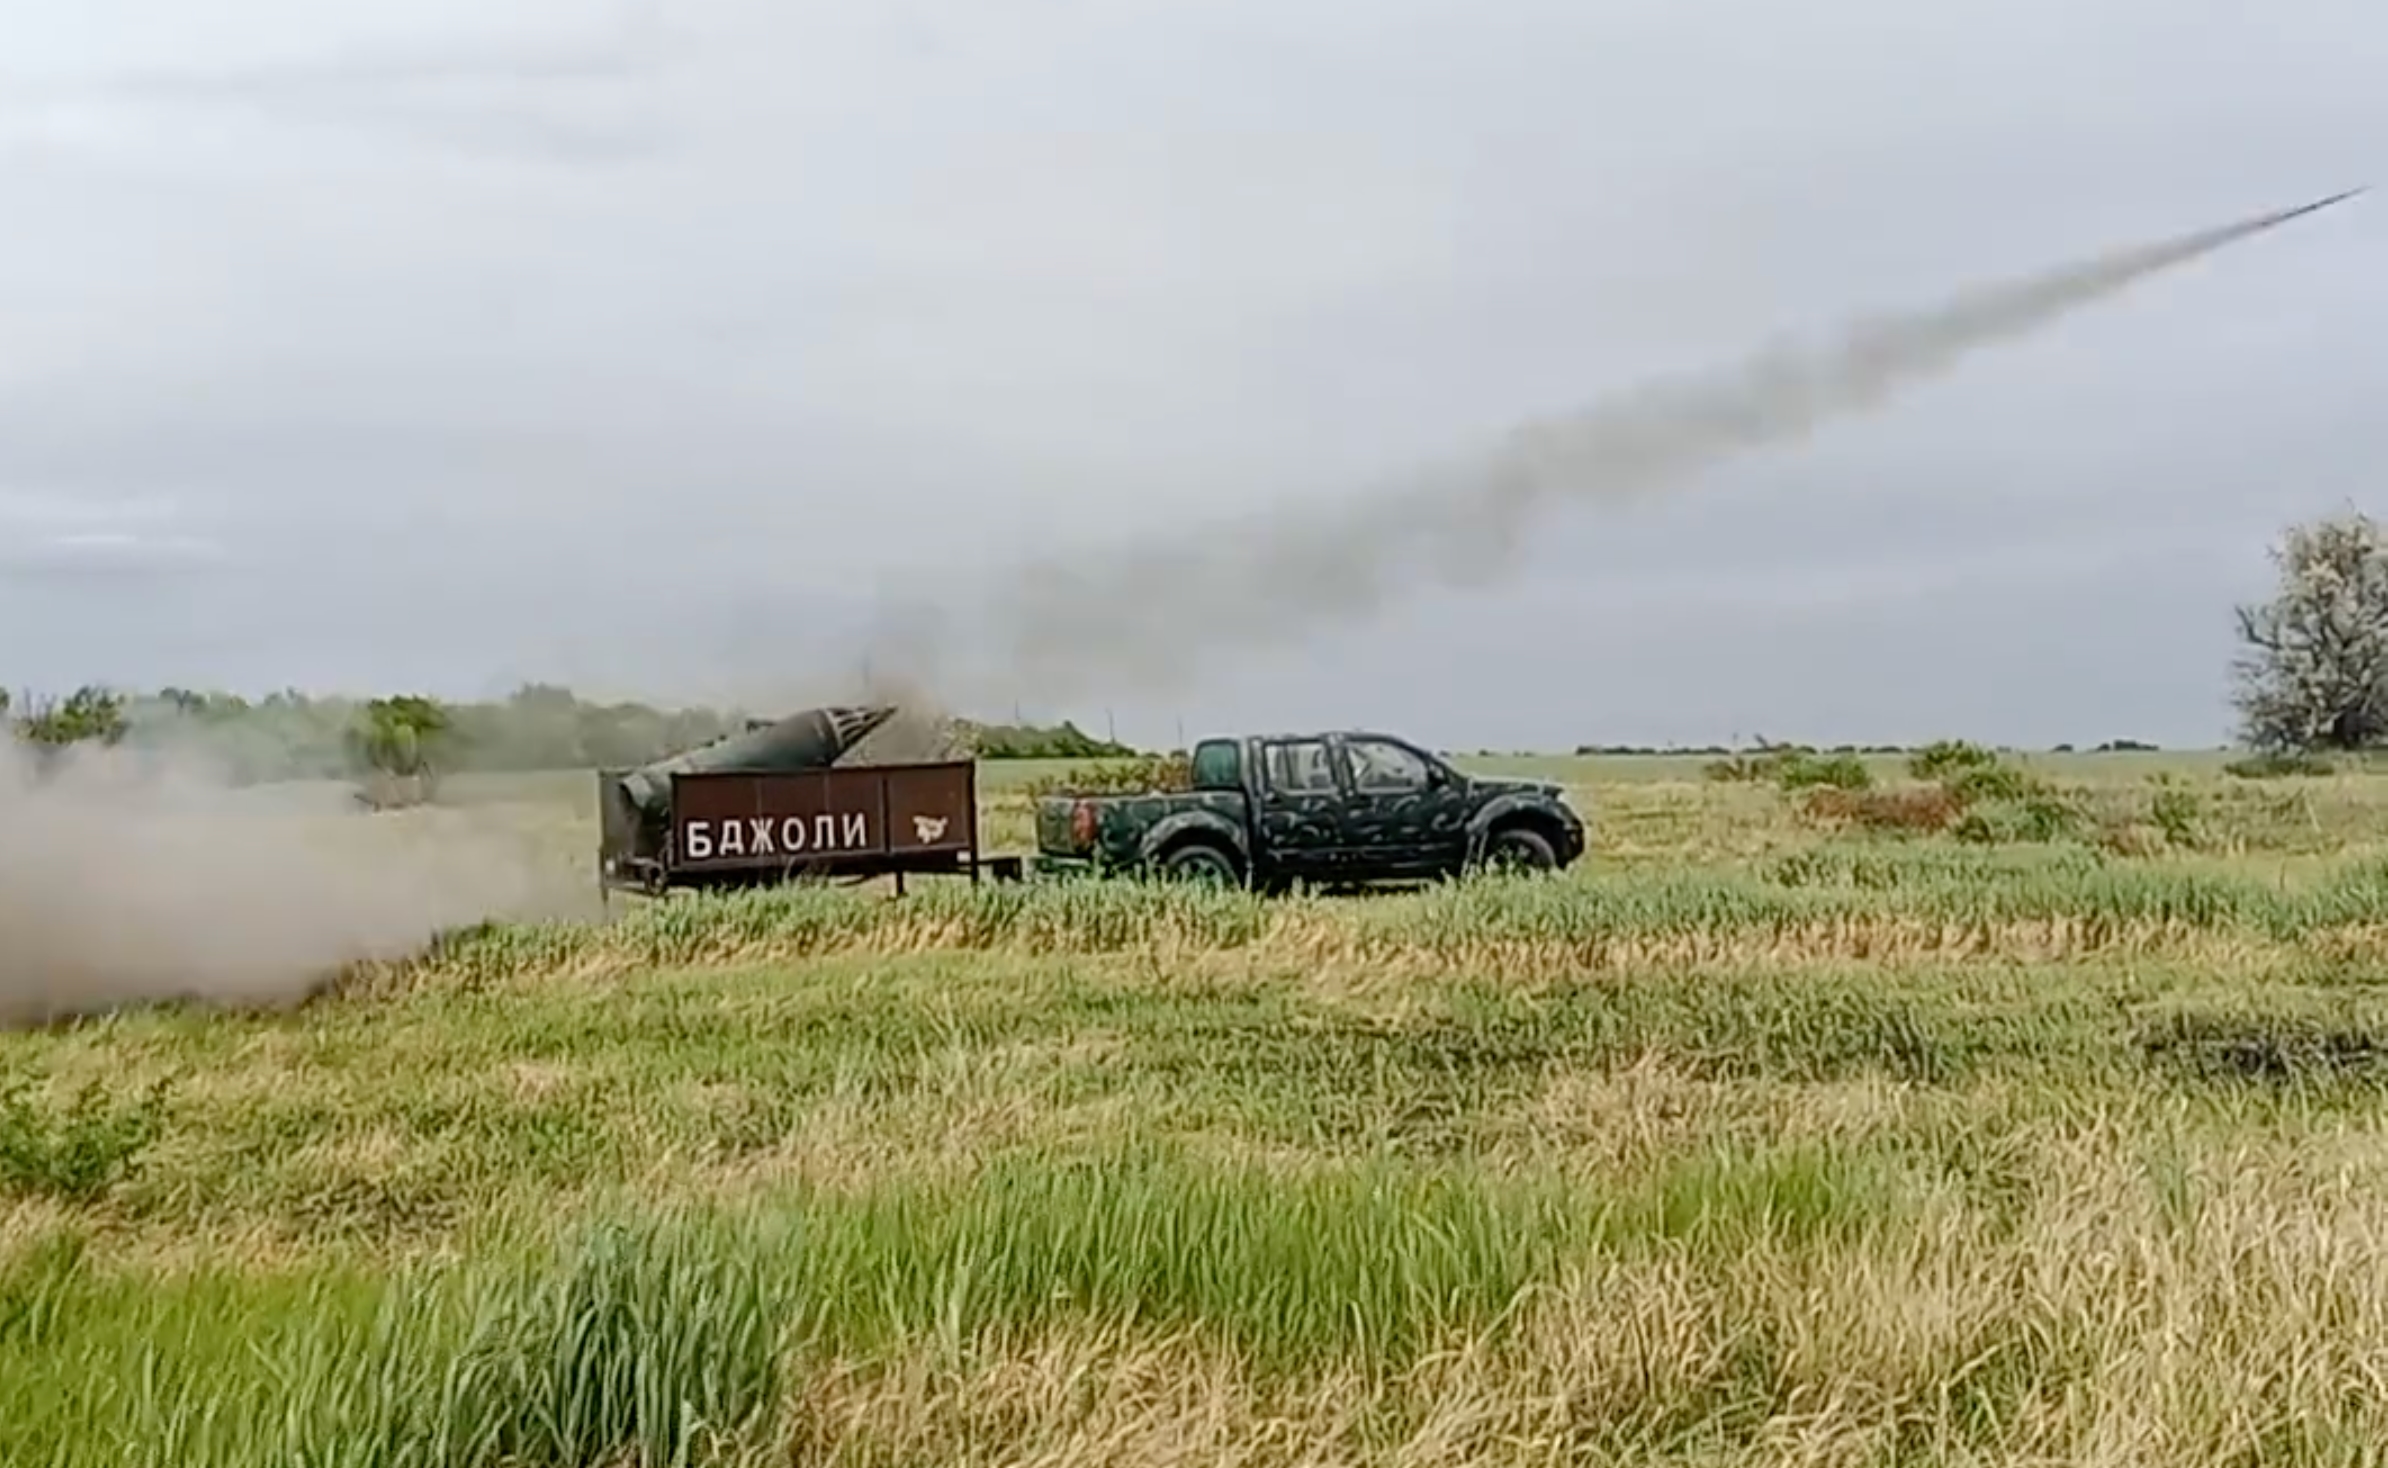 “Bees fly out to collect honey”: the Armed Forces of Ukraine showed how they use C-8 aircraft missiles from a makeshift ground installation